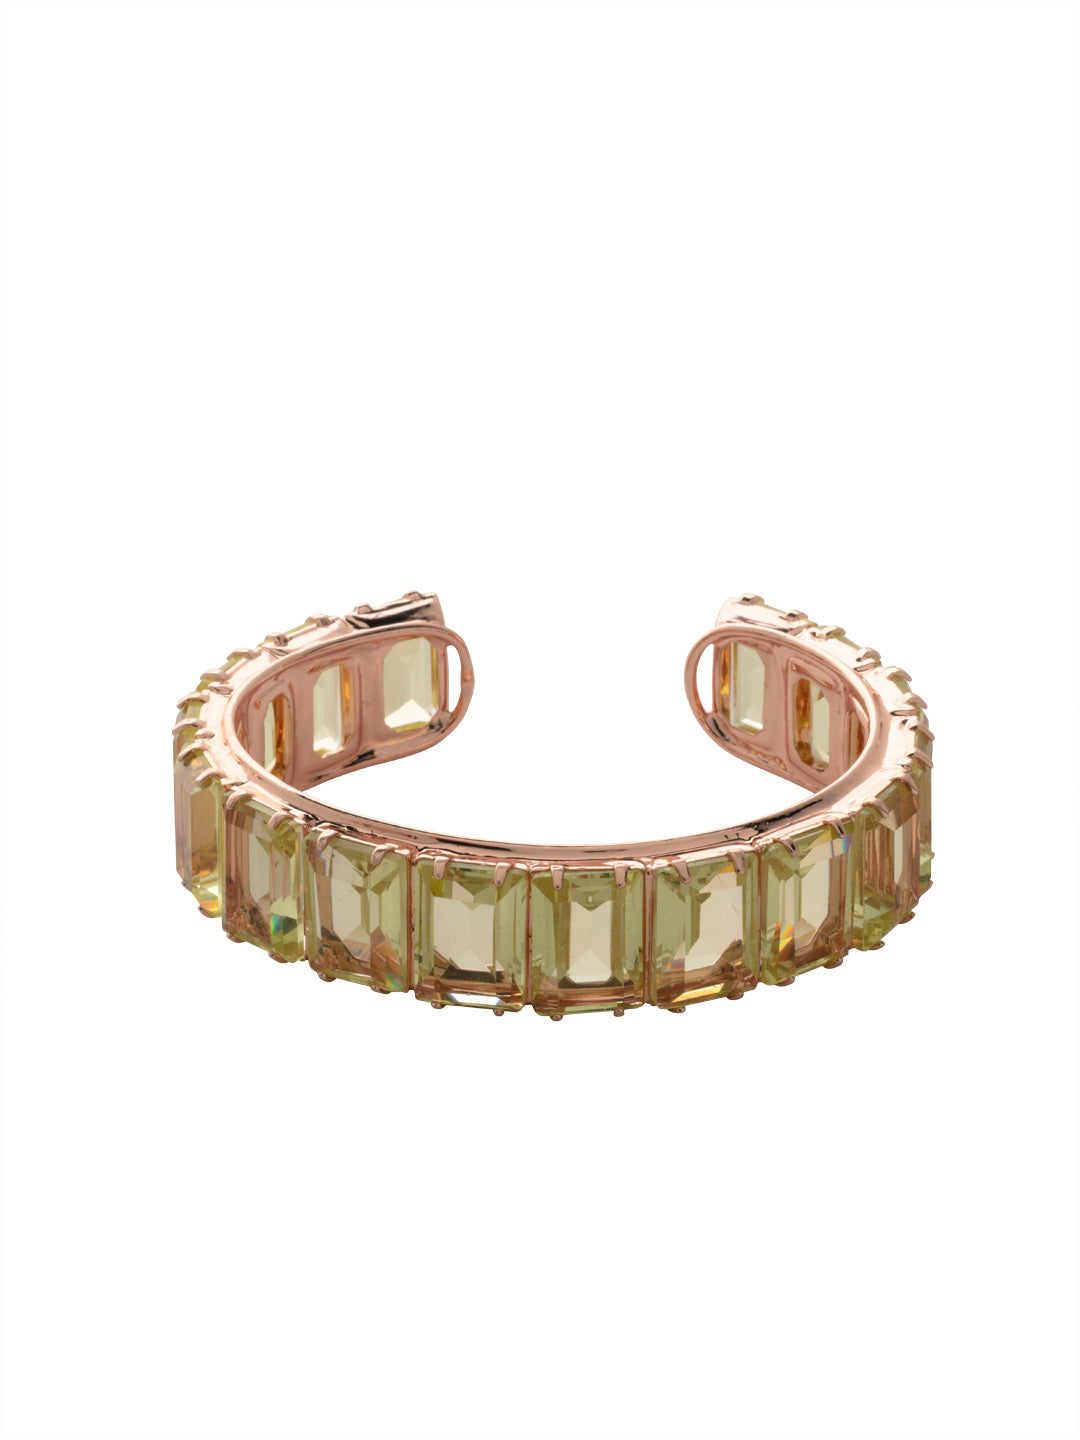 Julianna Emerald Cut Cuff Bracelet - BFD78RGPPN - <p>The Julianna Emerald Cut Cuff Bracelet features a row of rectangle cut candy drop crystals around an adjustable cuff bracelet band. From Sorrelli's Pink Pineapple collection in our Rose Gold-tone finish.</p>